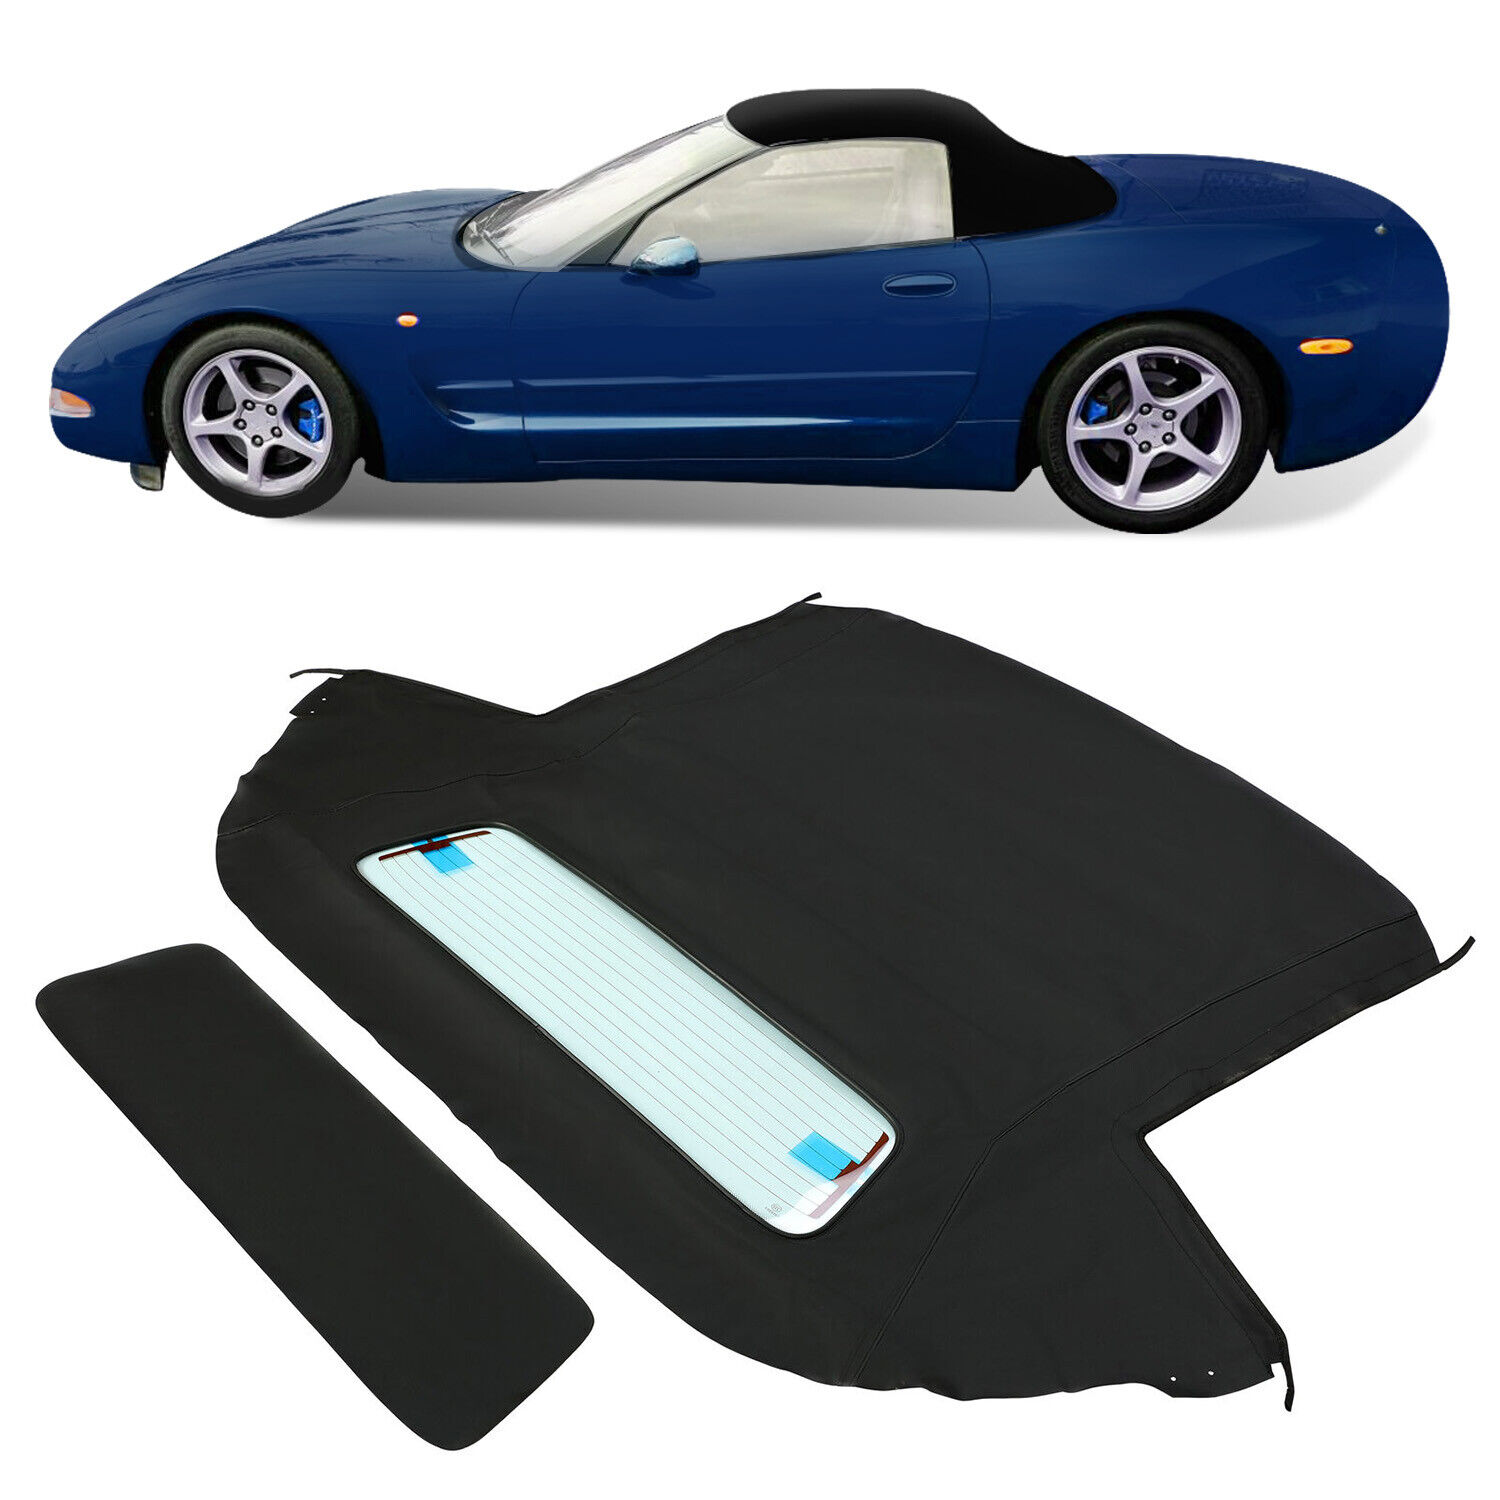 Convertible Soft Top & Heated Glass window  Fits For Corvette C5 1998-2004